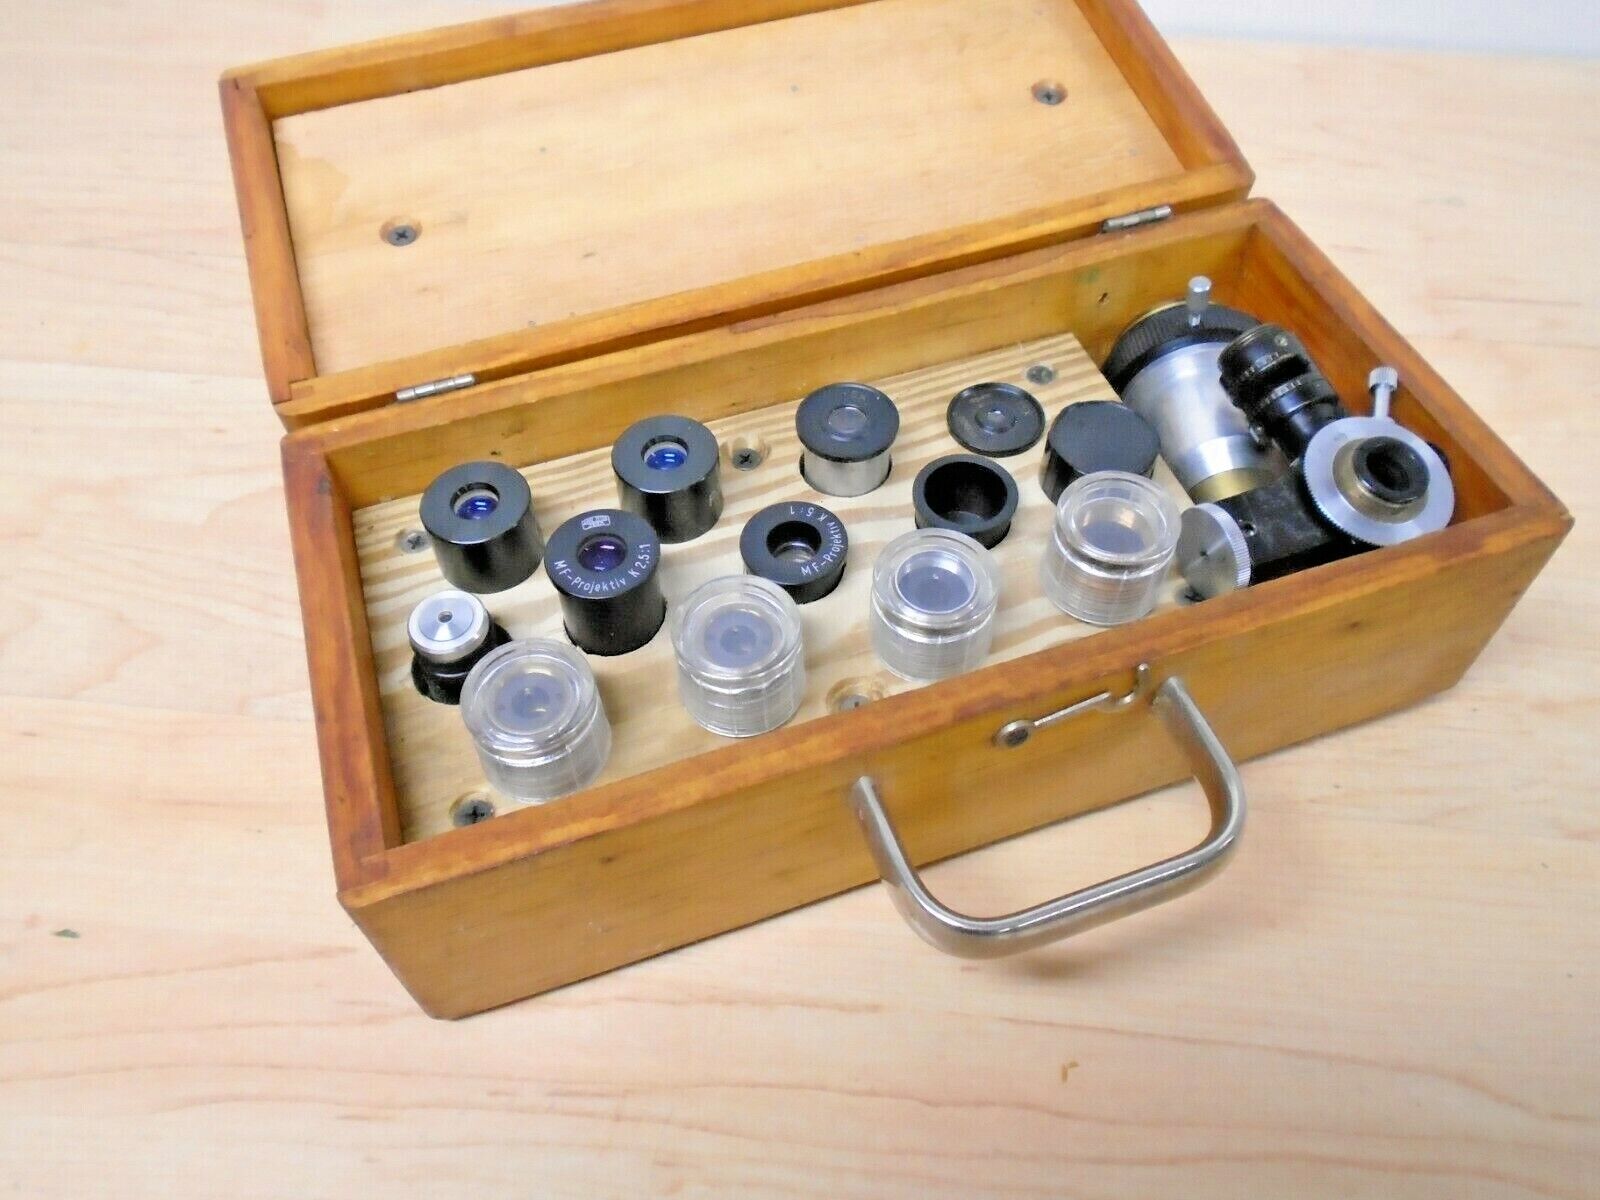 13+Microscope Lenses+Wood Case Bausch+Carl Zeiss+Others+Wood Case VG+Deal